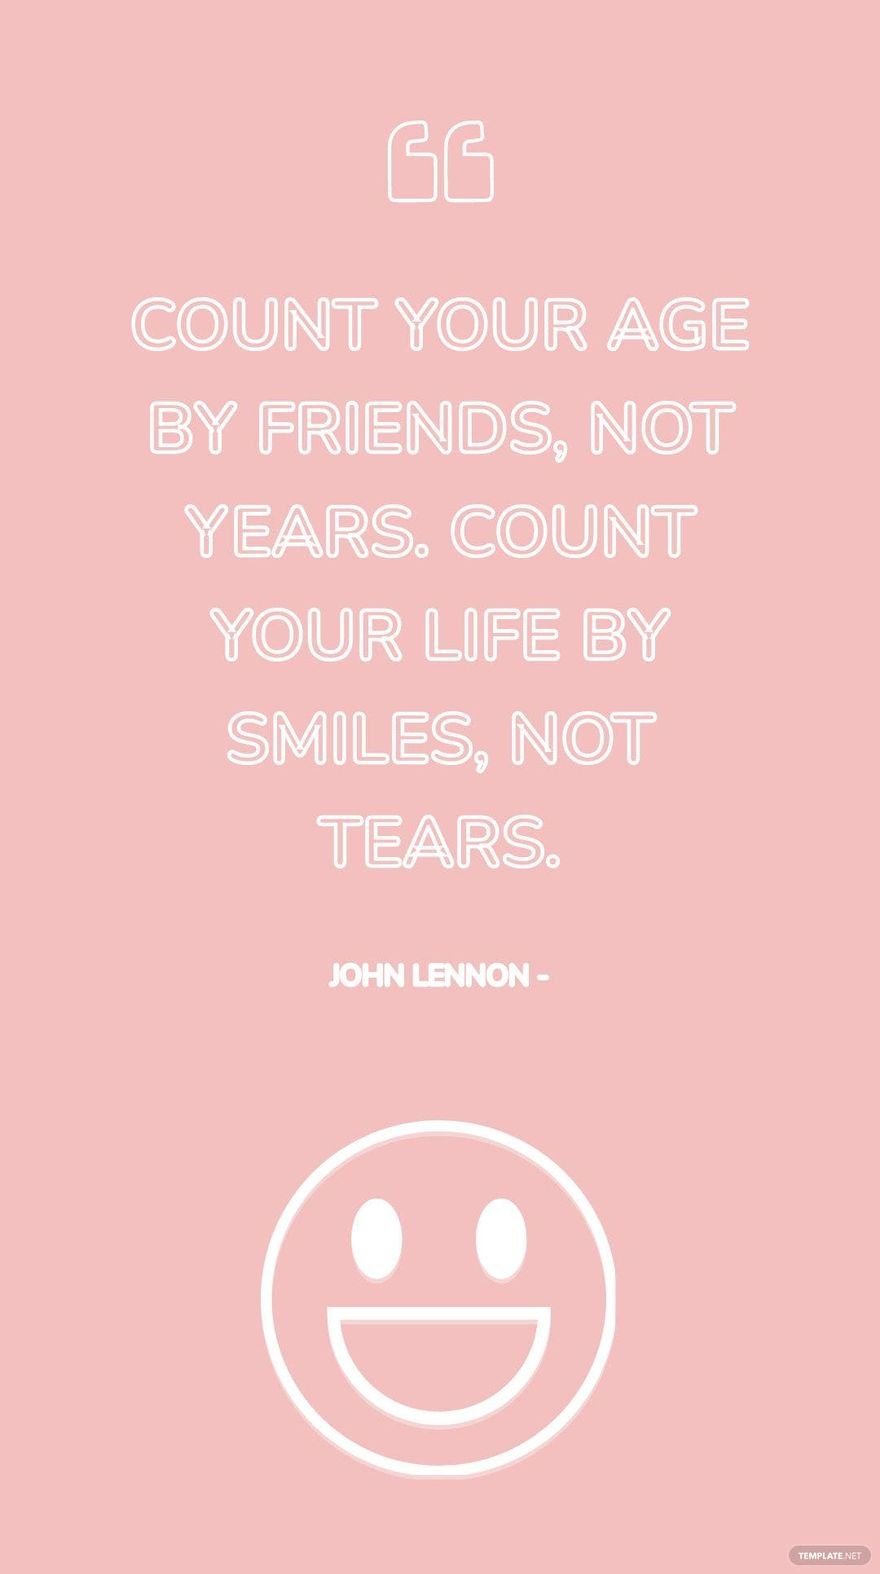 John Lennon - Count your age by friends, not years. Count your life by smiles, not tears.